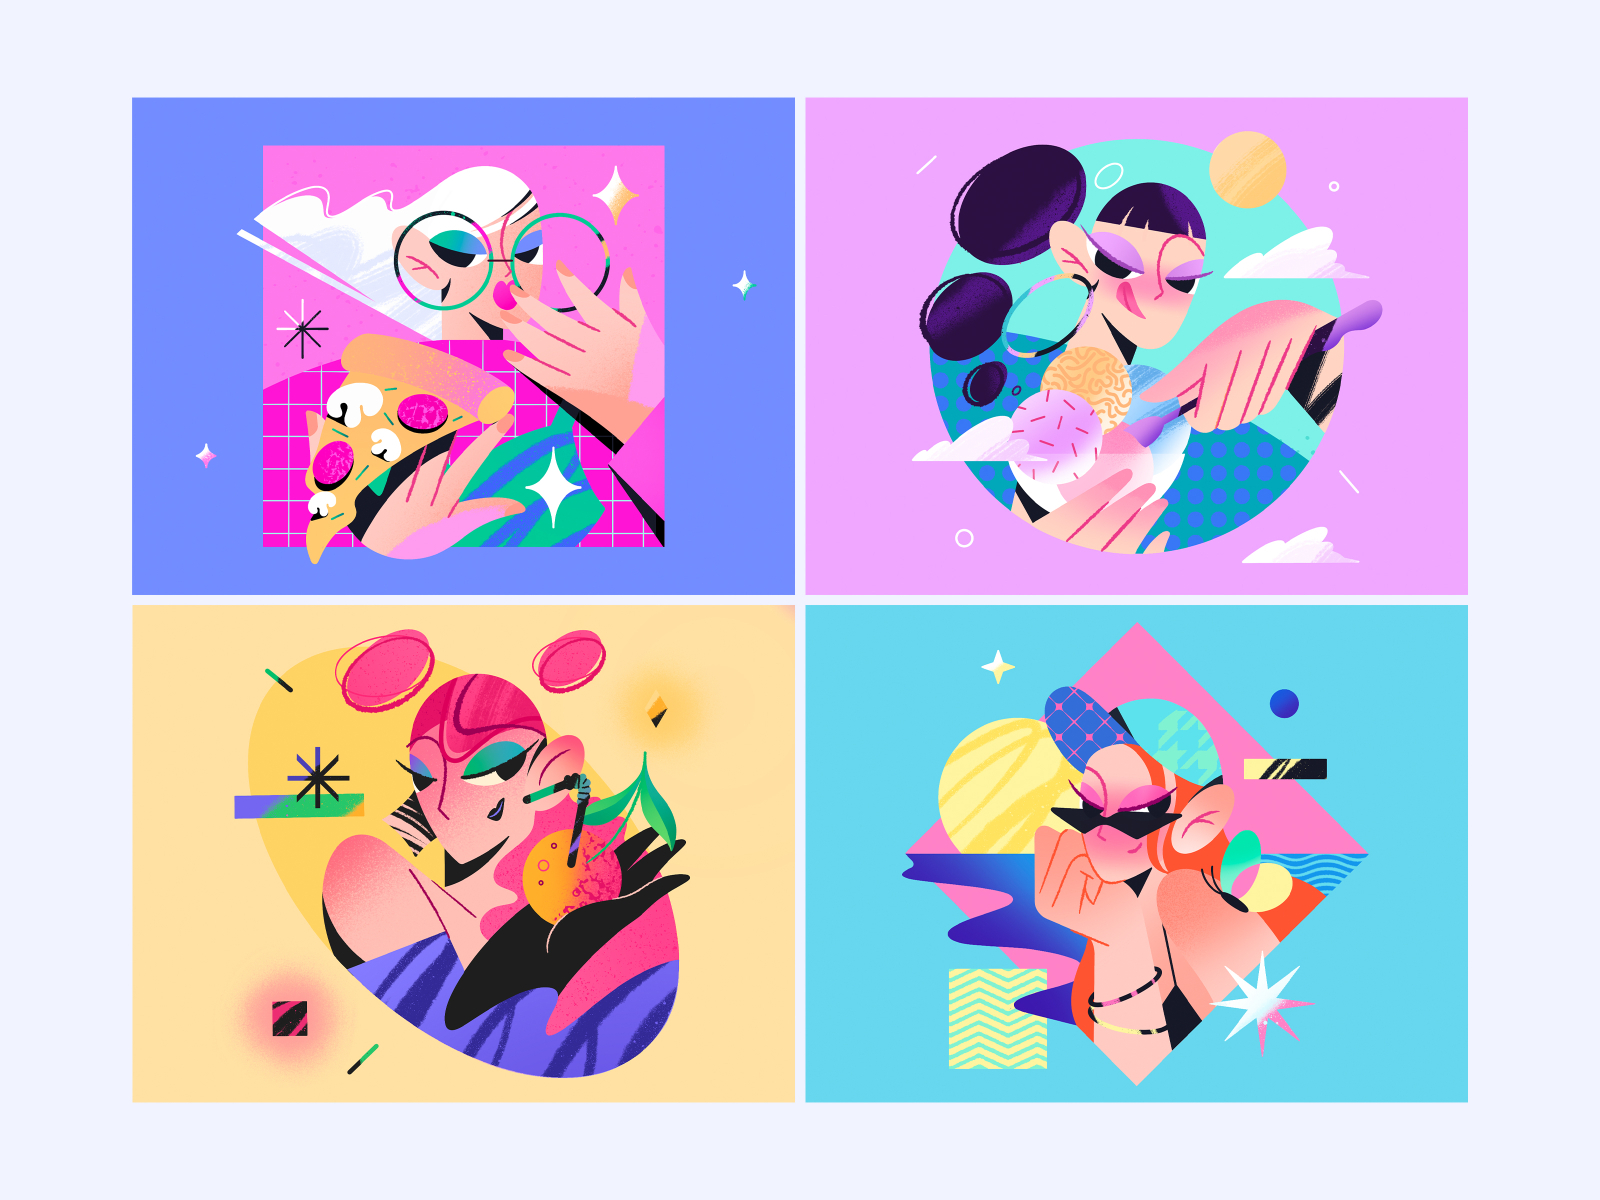 Fun with faces by Kristina Pedos @13chrisart on Dribbble